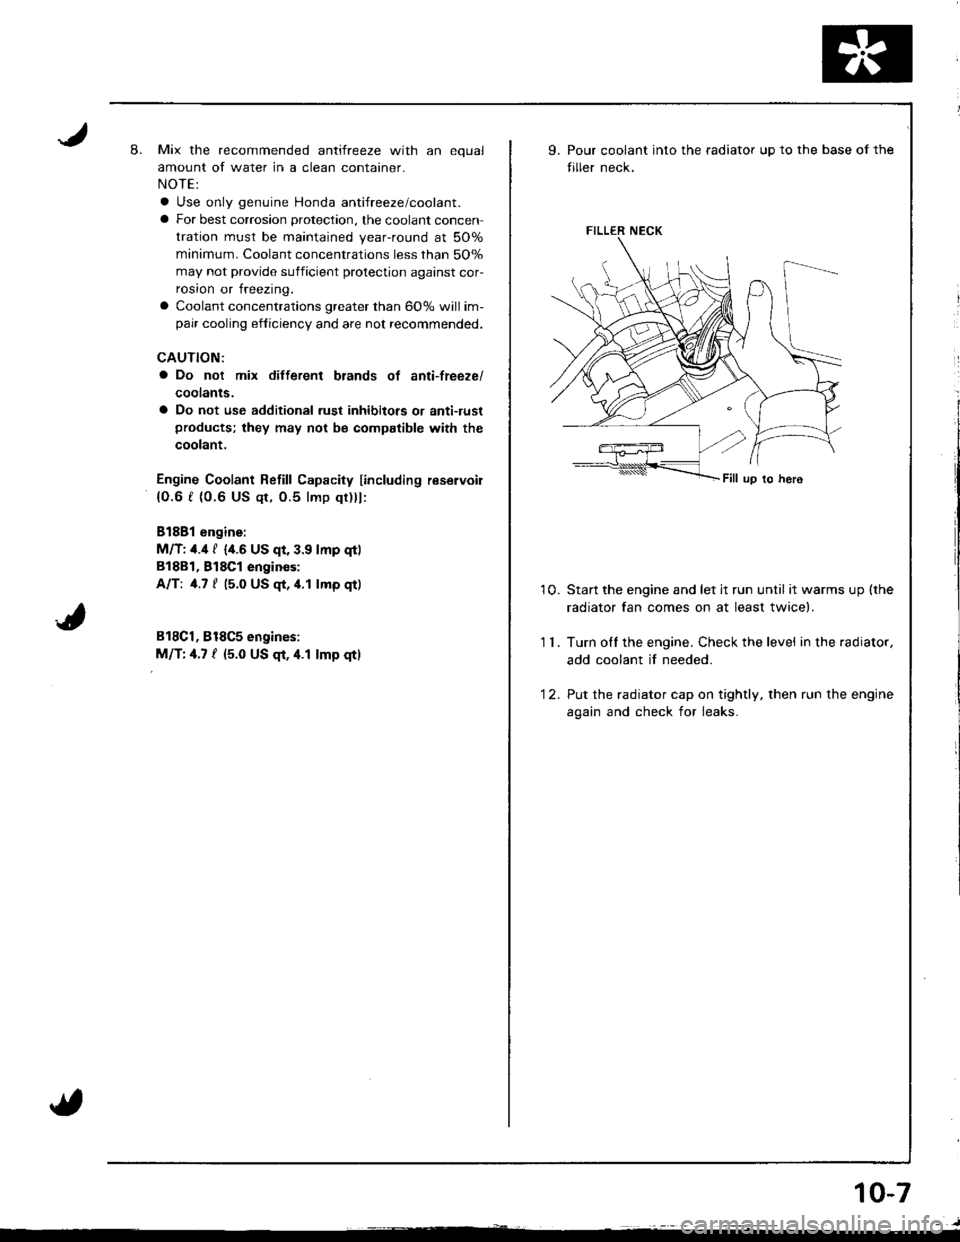 HONDA INTEGRA 1998 4.G Workshop Manual 8.Mix the recommended antifreeze with an equal
amount of water in a clean container.
NOTE:
a Use only genuine Honda antifreeze/coolant.
a For best corrosion protection, the coolant concen-
tration mus